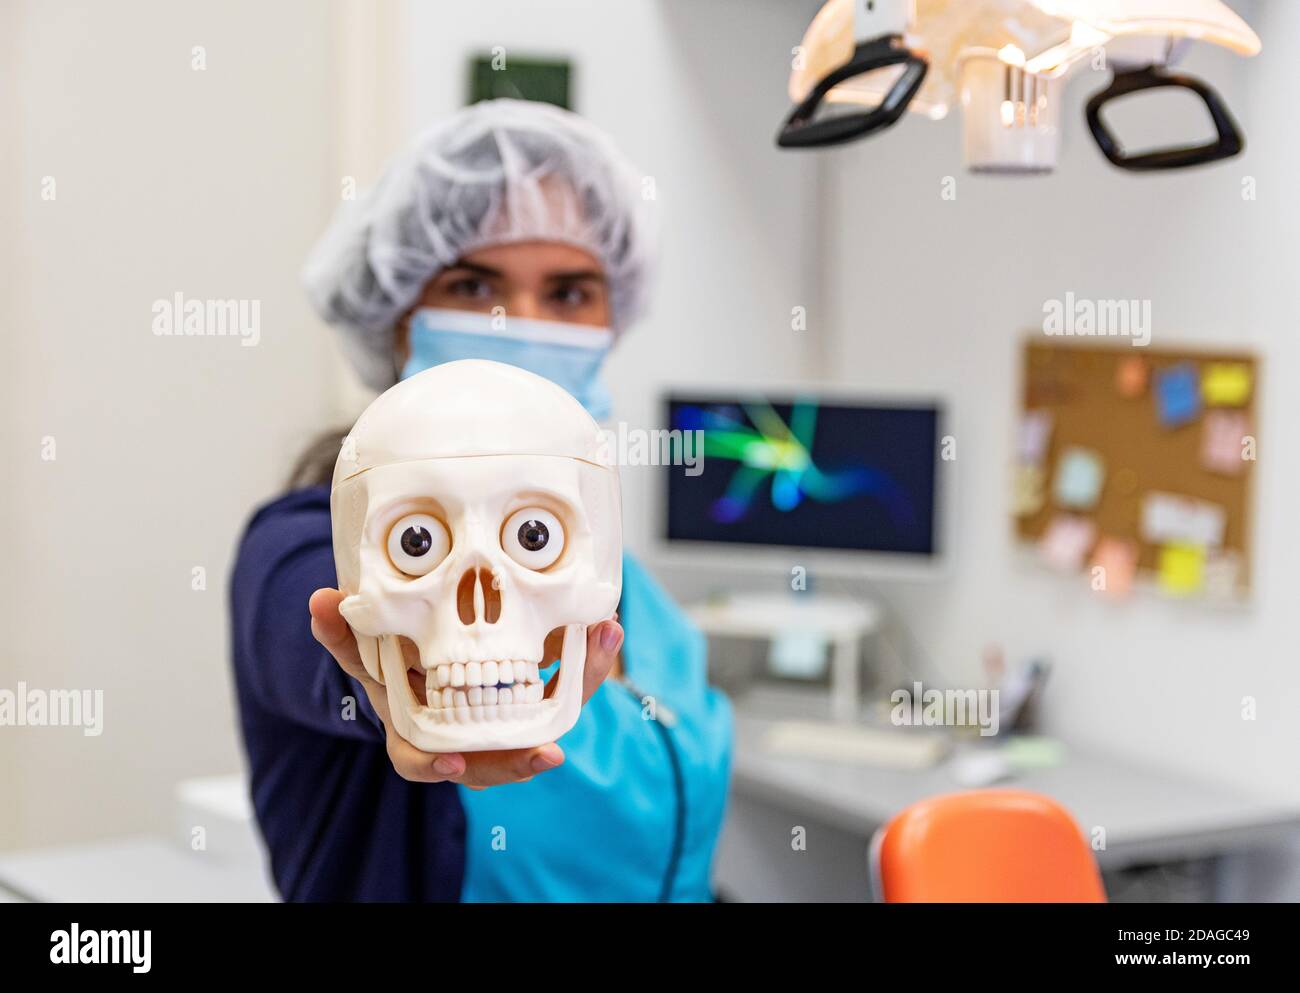 A doctor in medical uniform, hygiene headcover and face mask holding skull in hand Stock Photo